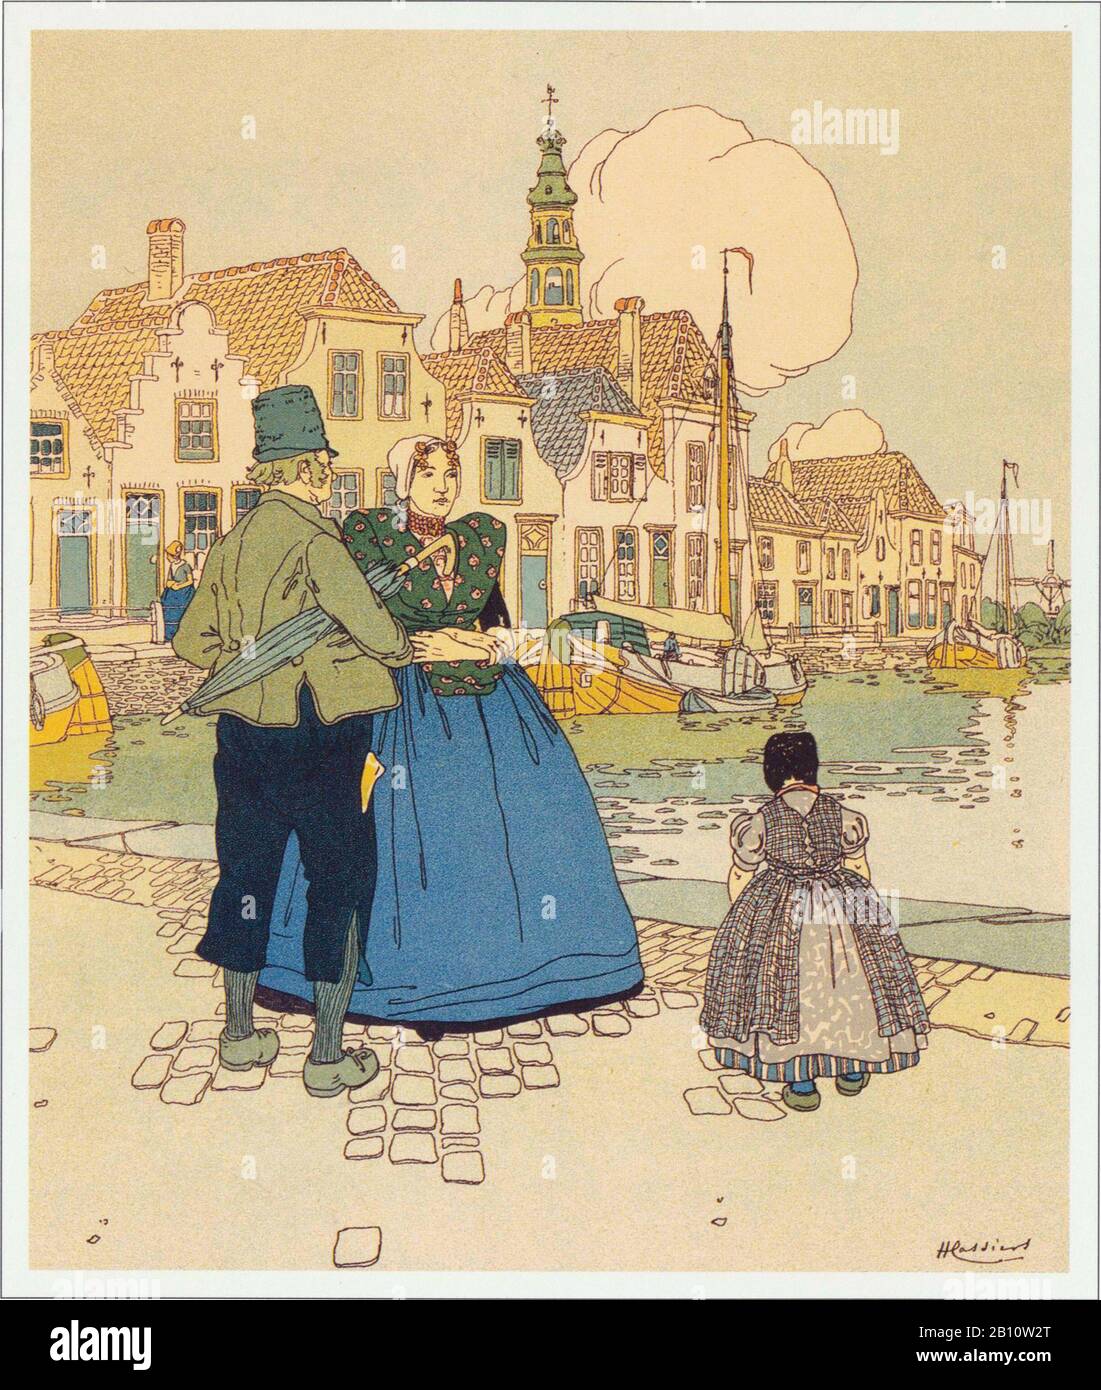 Havenplaats - Illustration by Henri Cassiers (1858 - 1944) Stock Photo